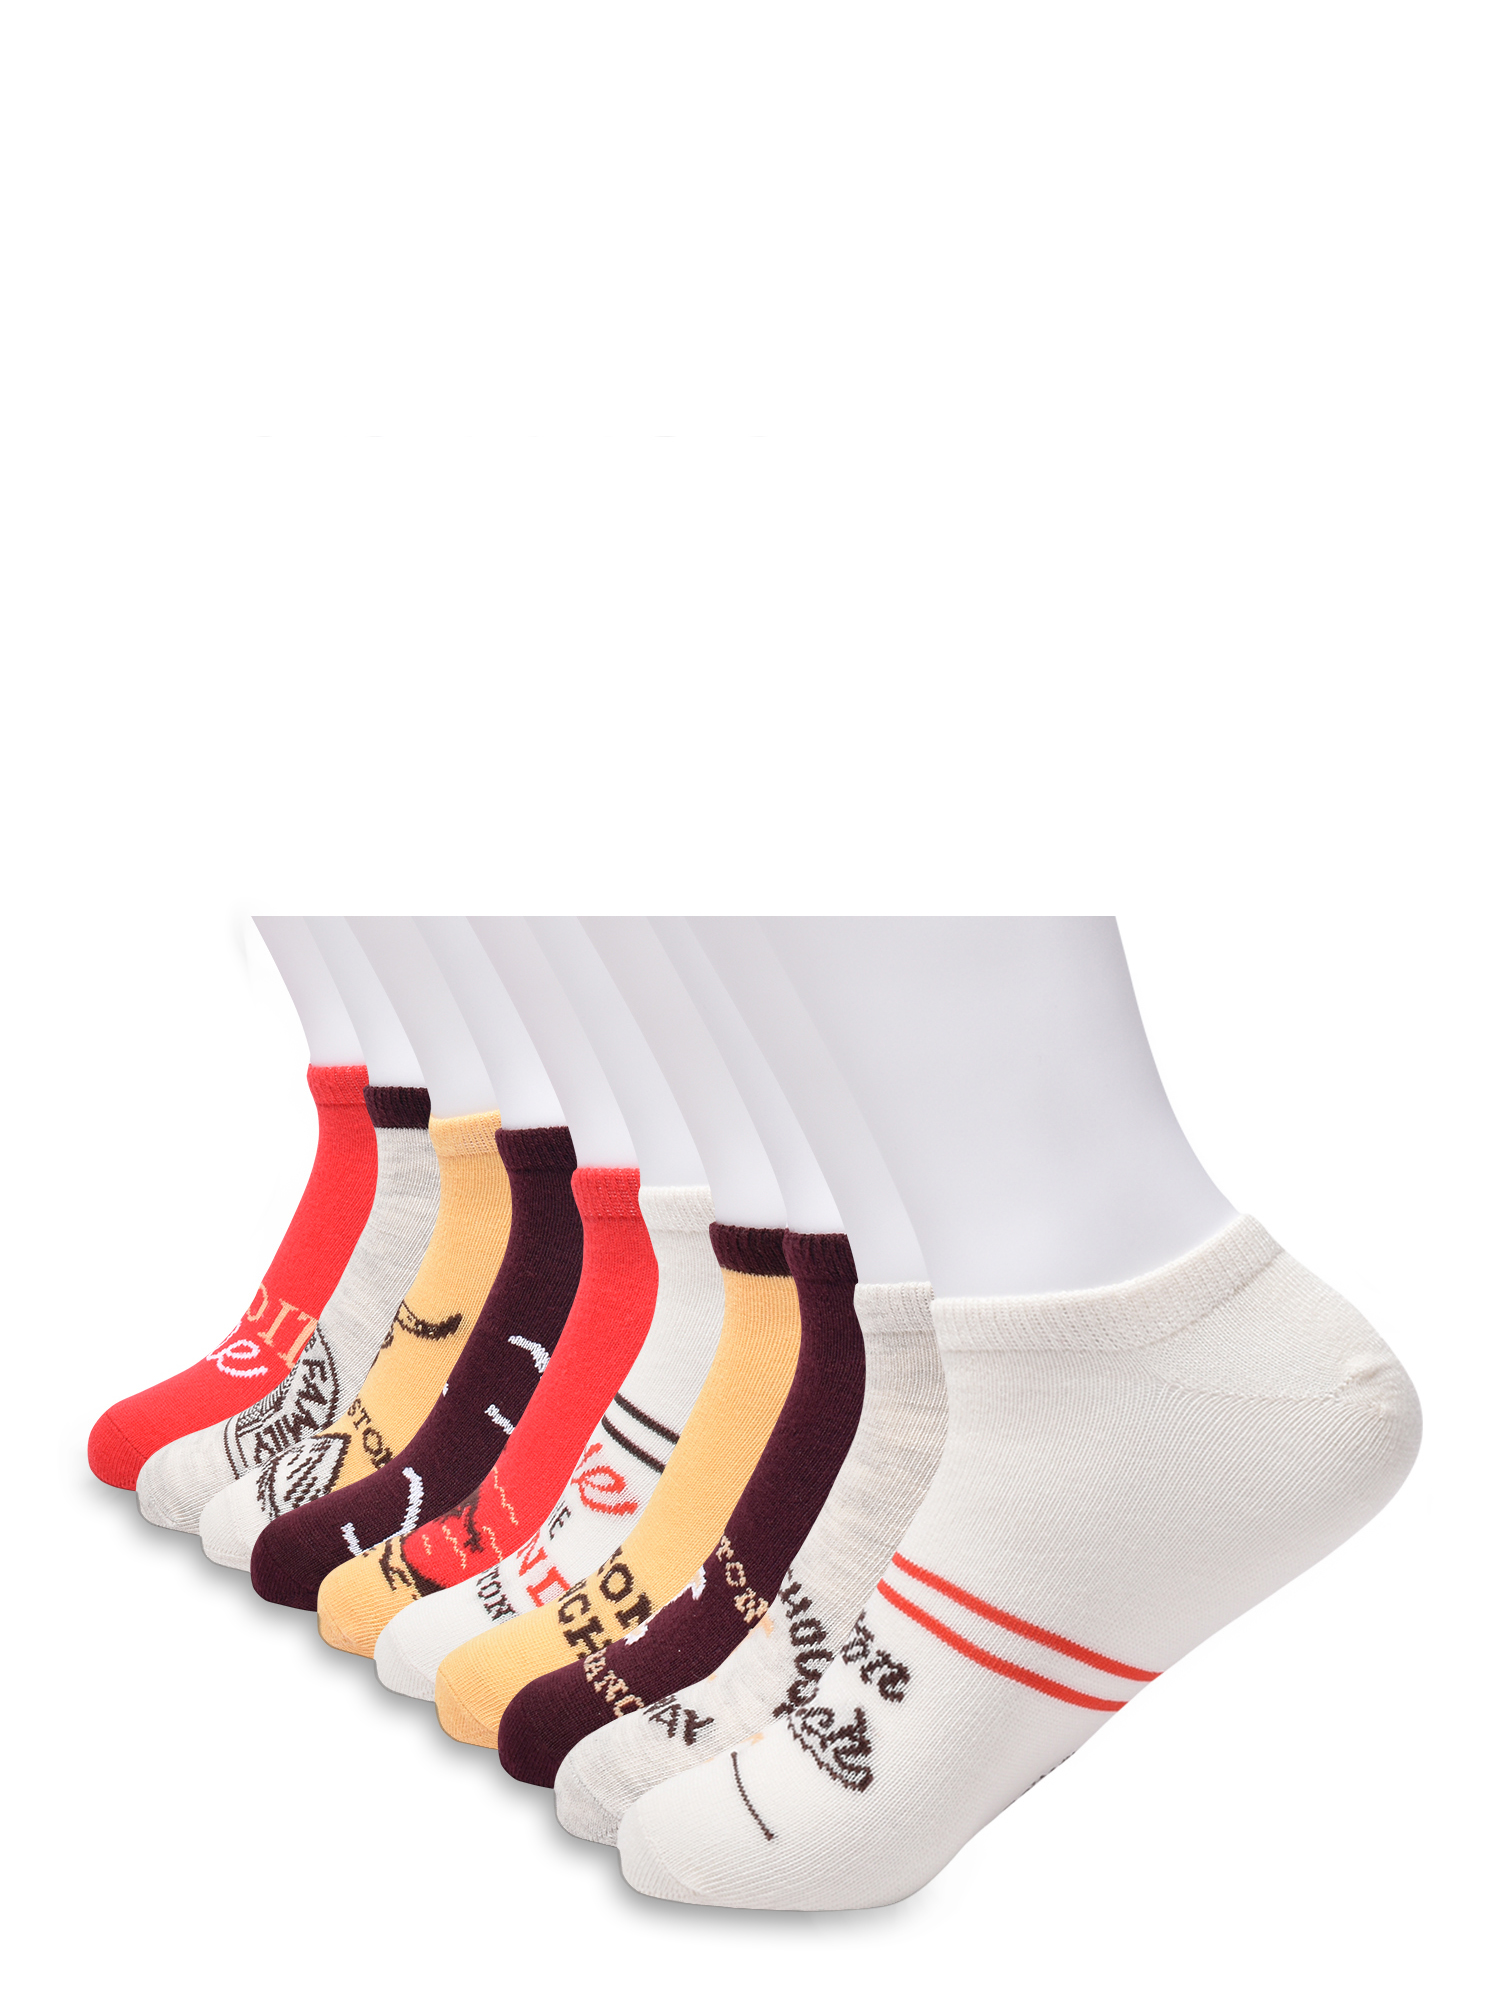 Yellowstone Womens Graphic Super No Show Socks, 10-Pack, Sizes 4-10 - image 3 of 5